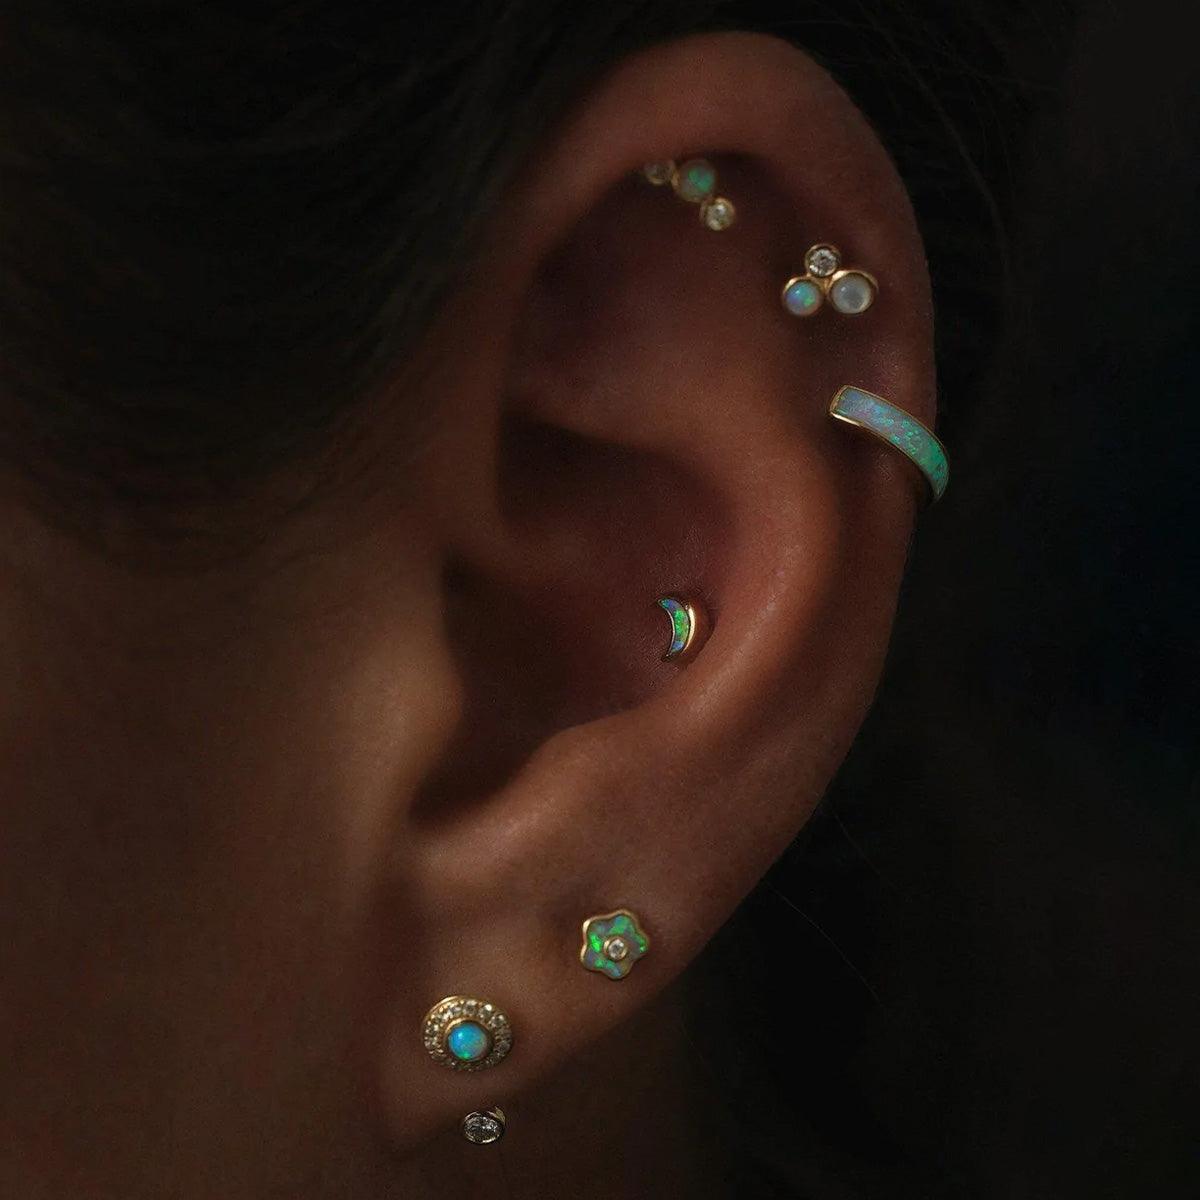 Cartilage Piercing: Everything You Need to Know - At Present